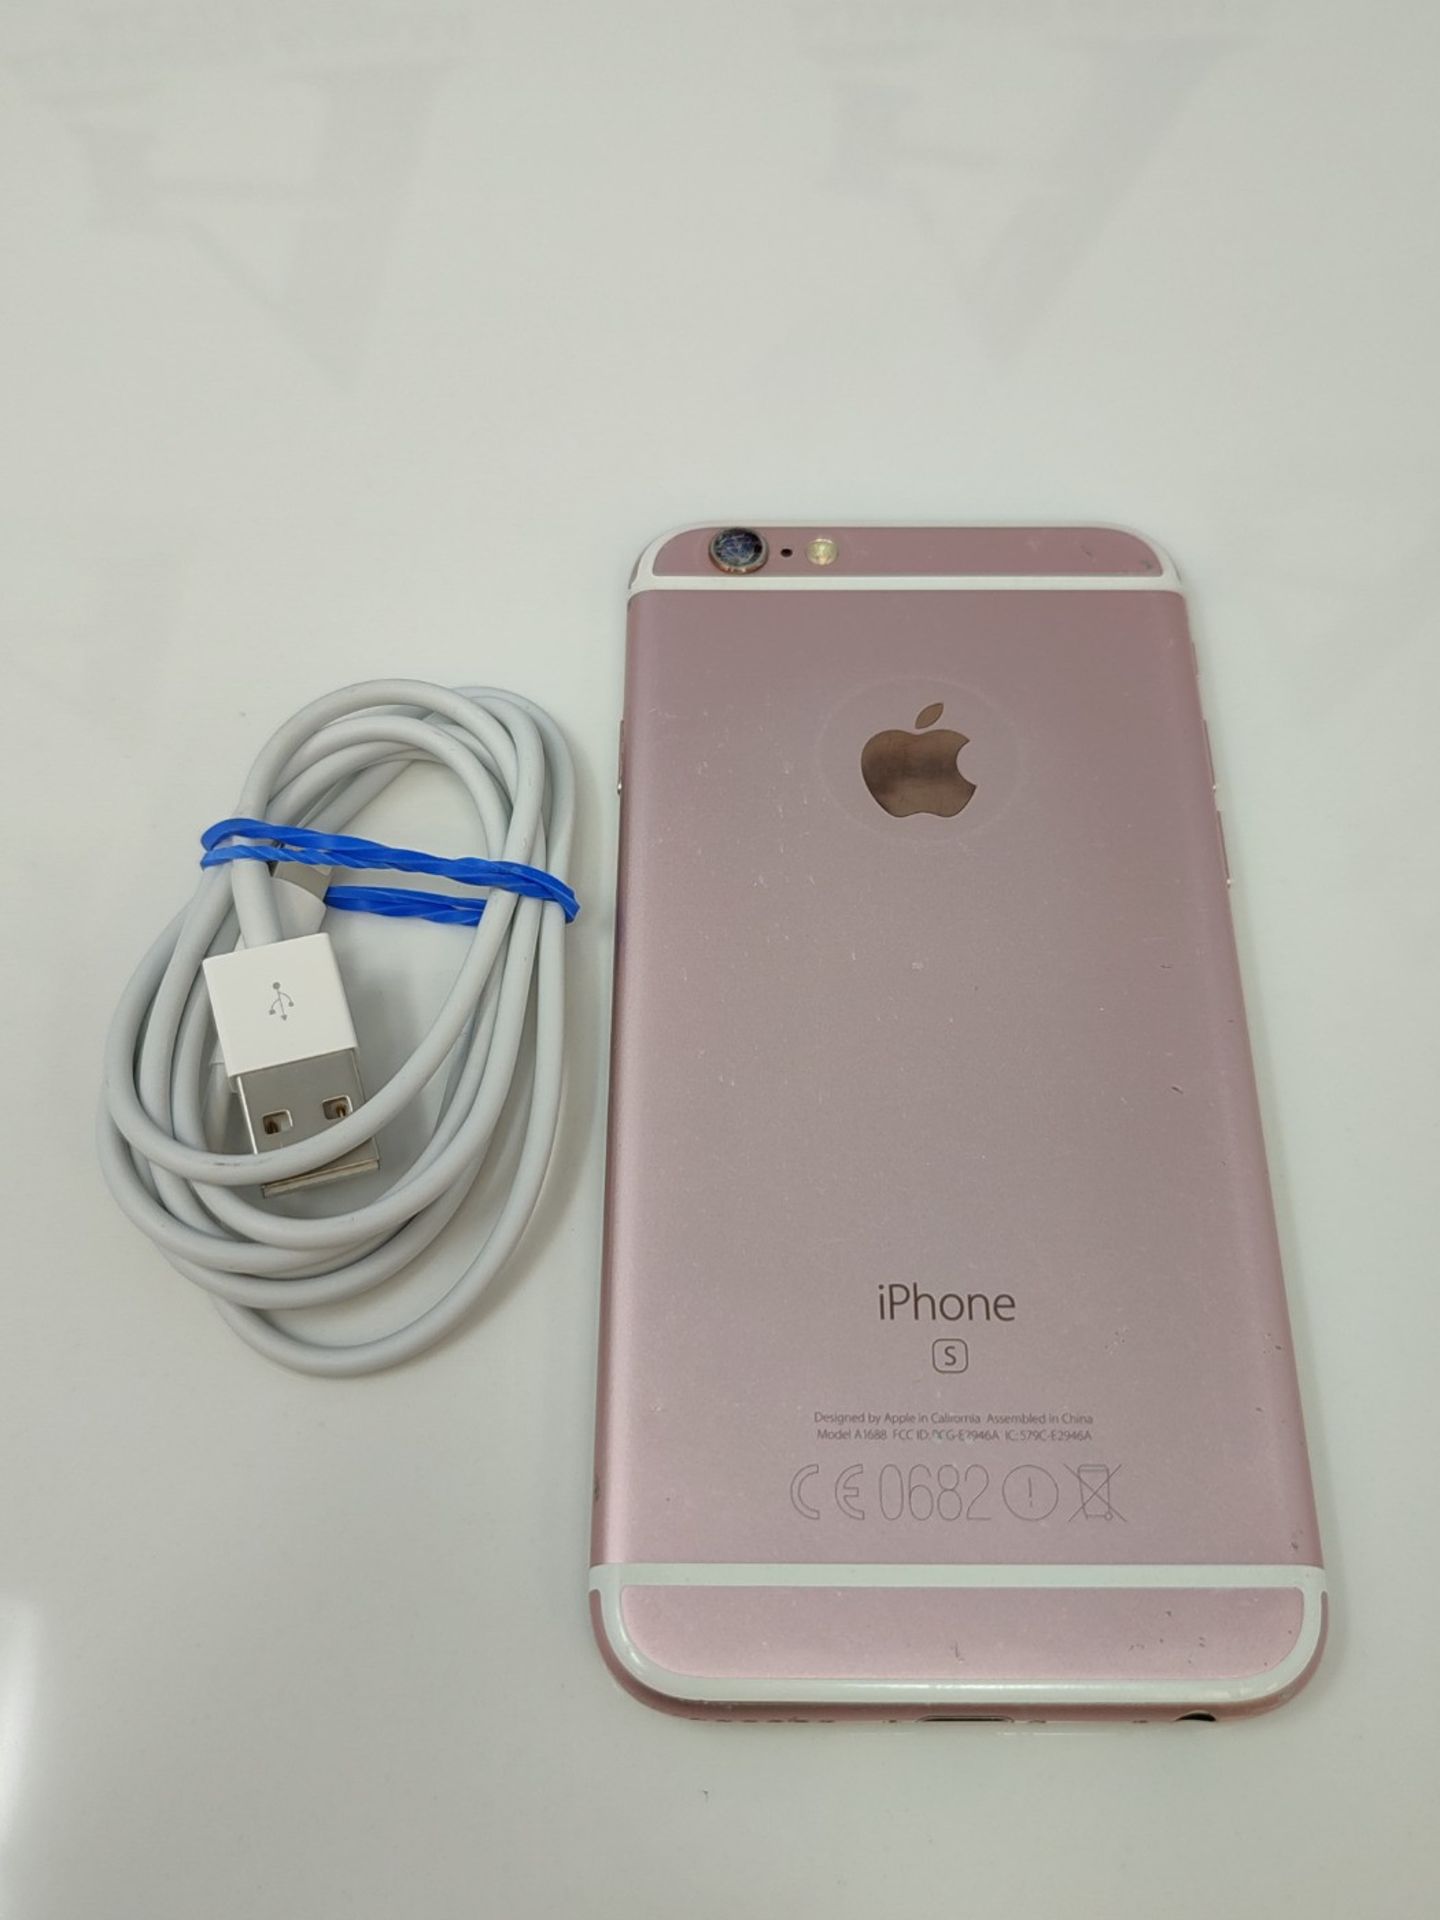 Apple iPhone 6s - 64GB - Rose Gold, A1688 - Image 2 of 2